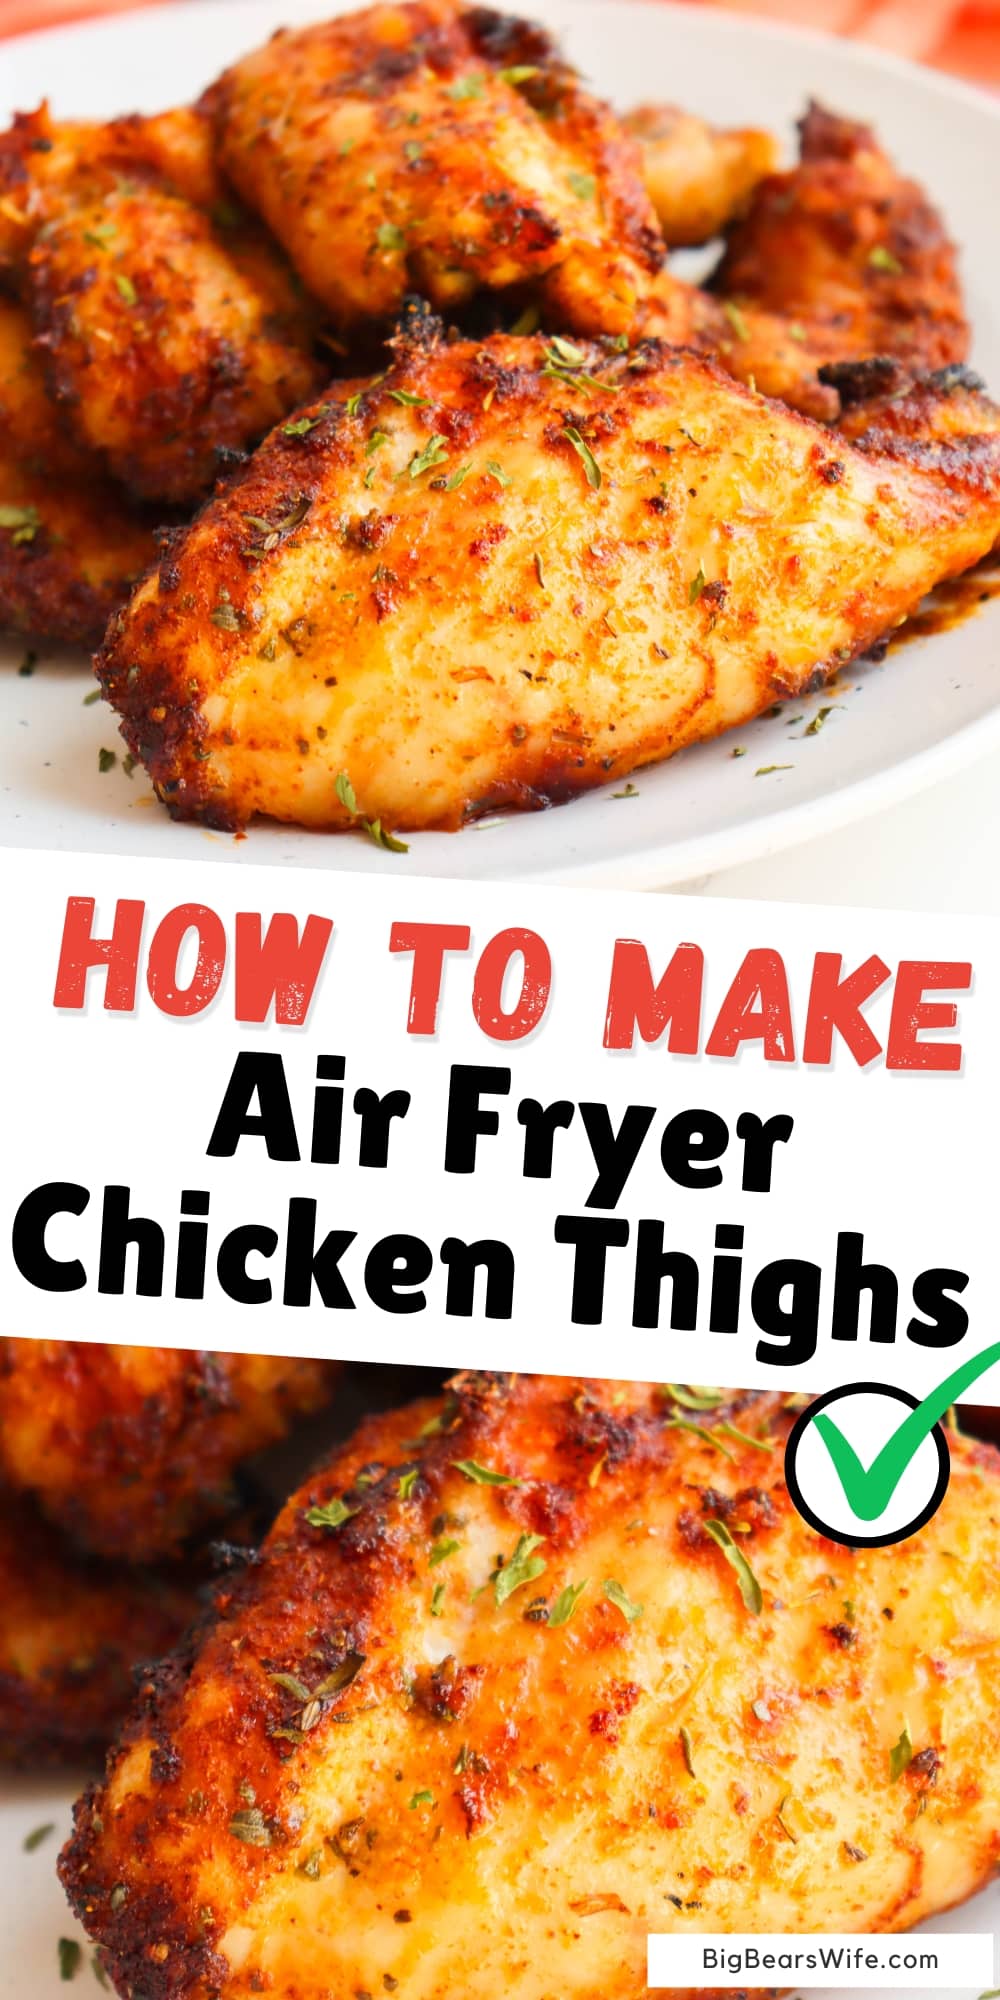 You'll love how easy it is to make air fryer chicken thighs. Cooking chicken in the air fryer not only saves time but leaves you with a super juicy piece of chicken.  via @bigbearswife